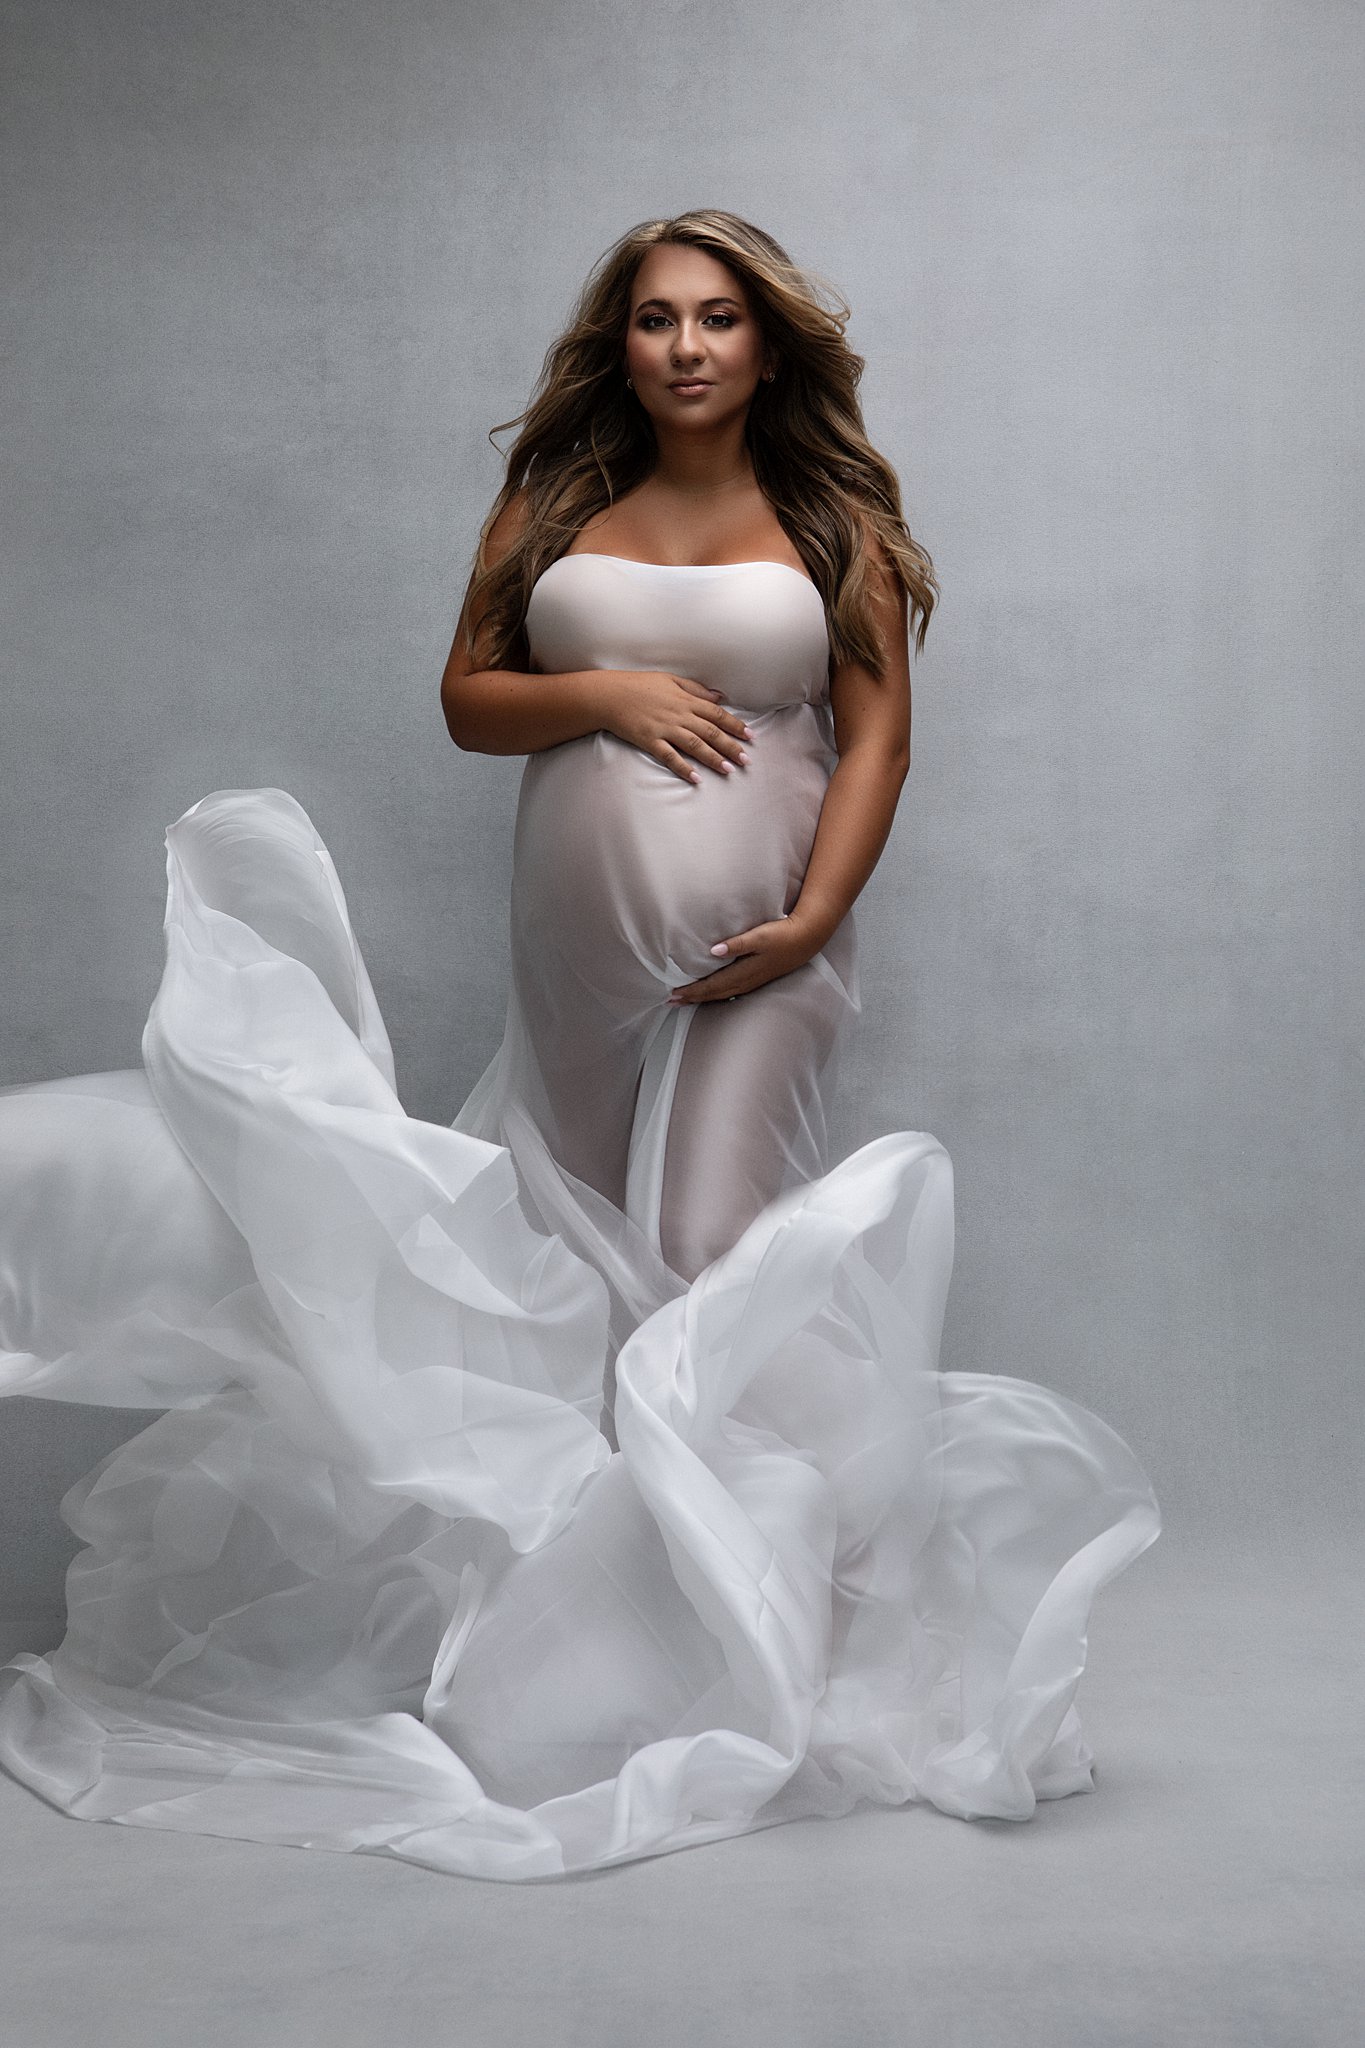 A pregnant woman stands in a studio in a sheer white maternity gown